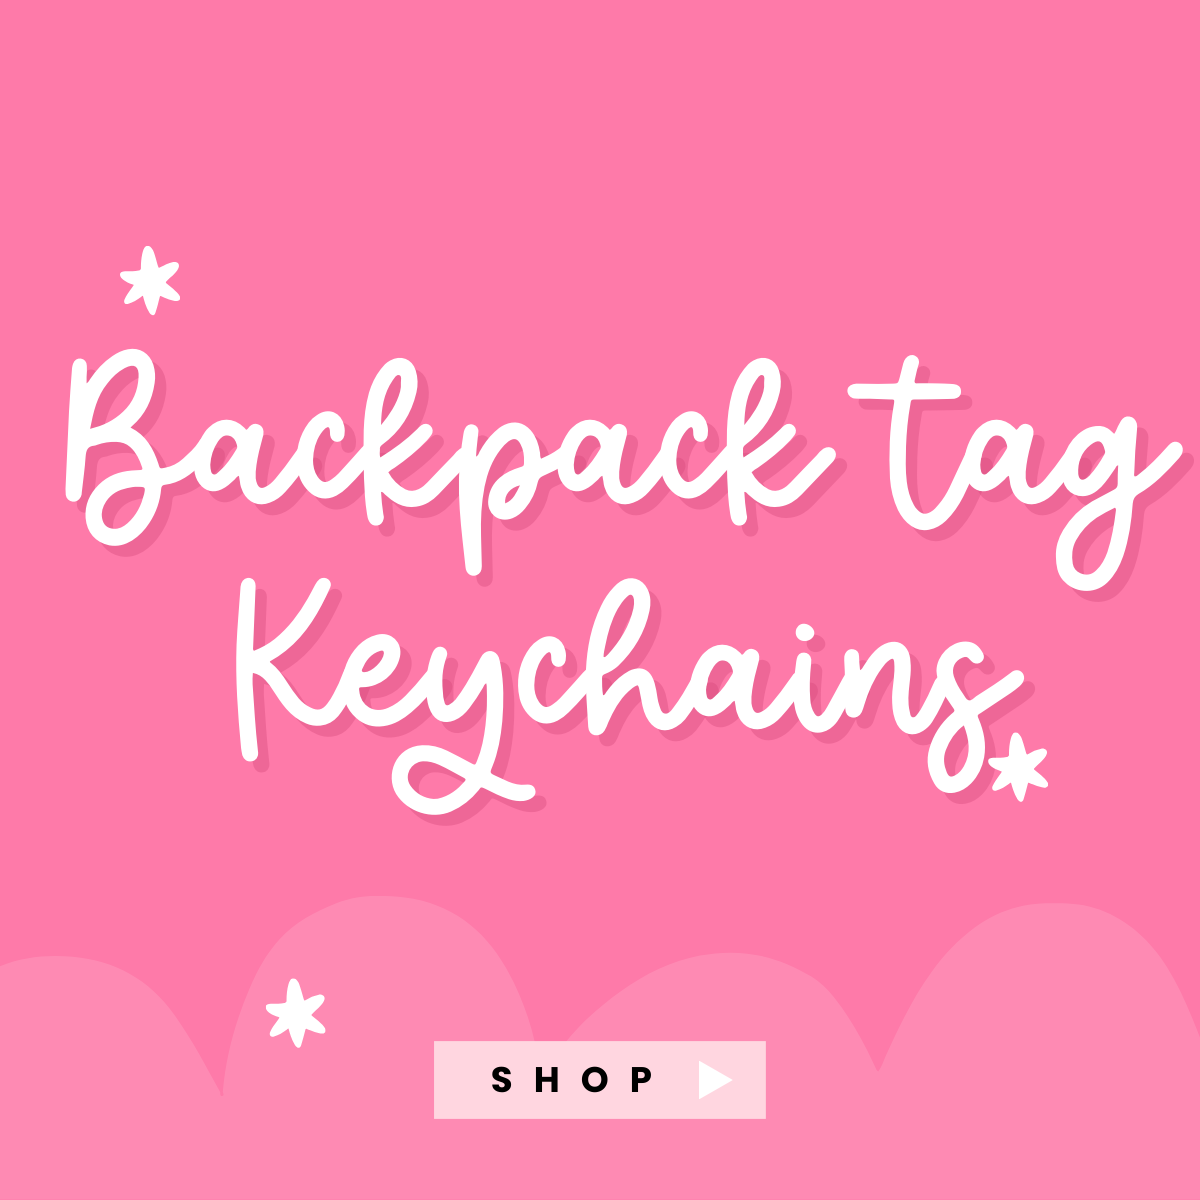 BACKPACK TAG | KEYCHAINS